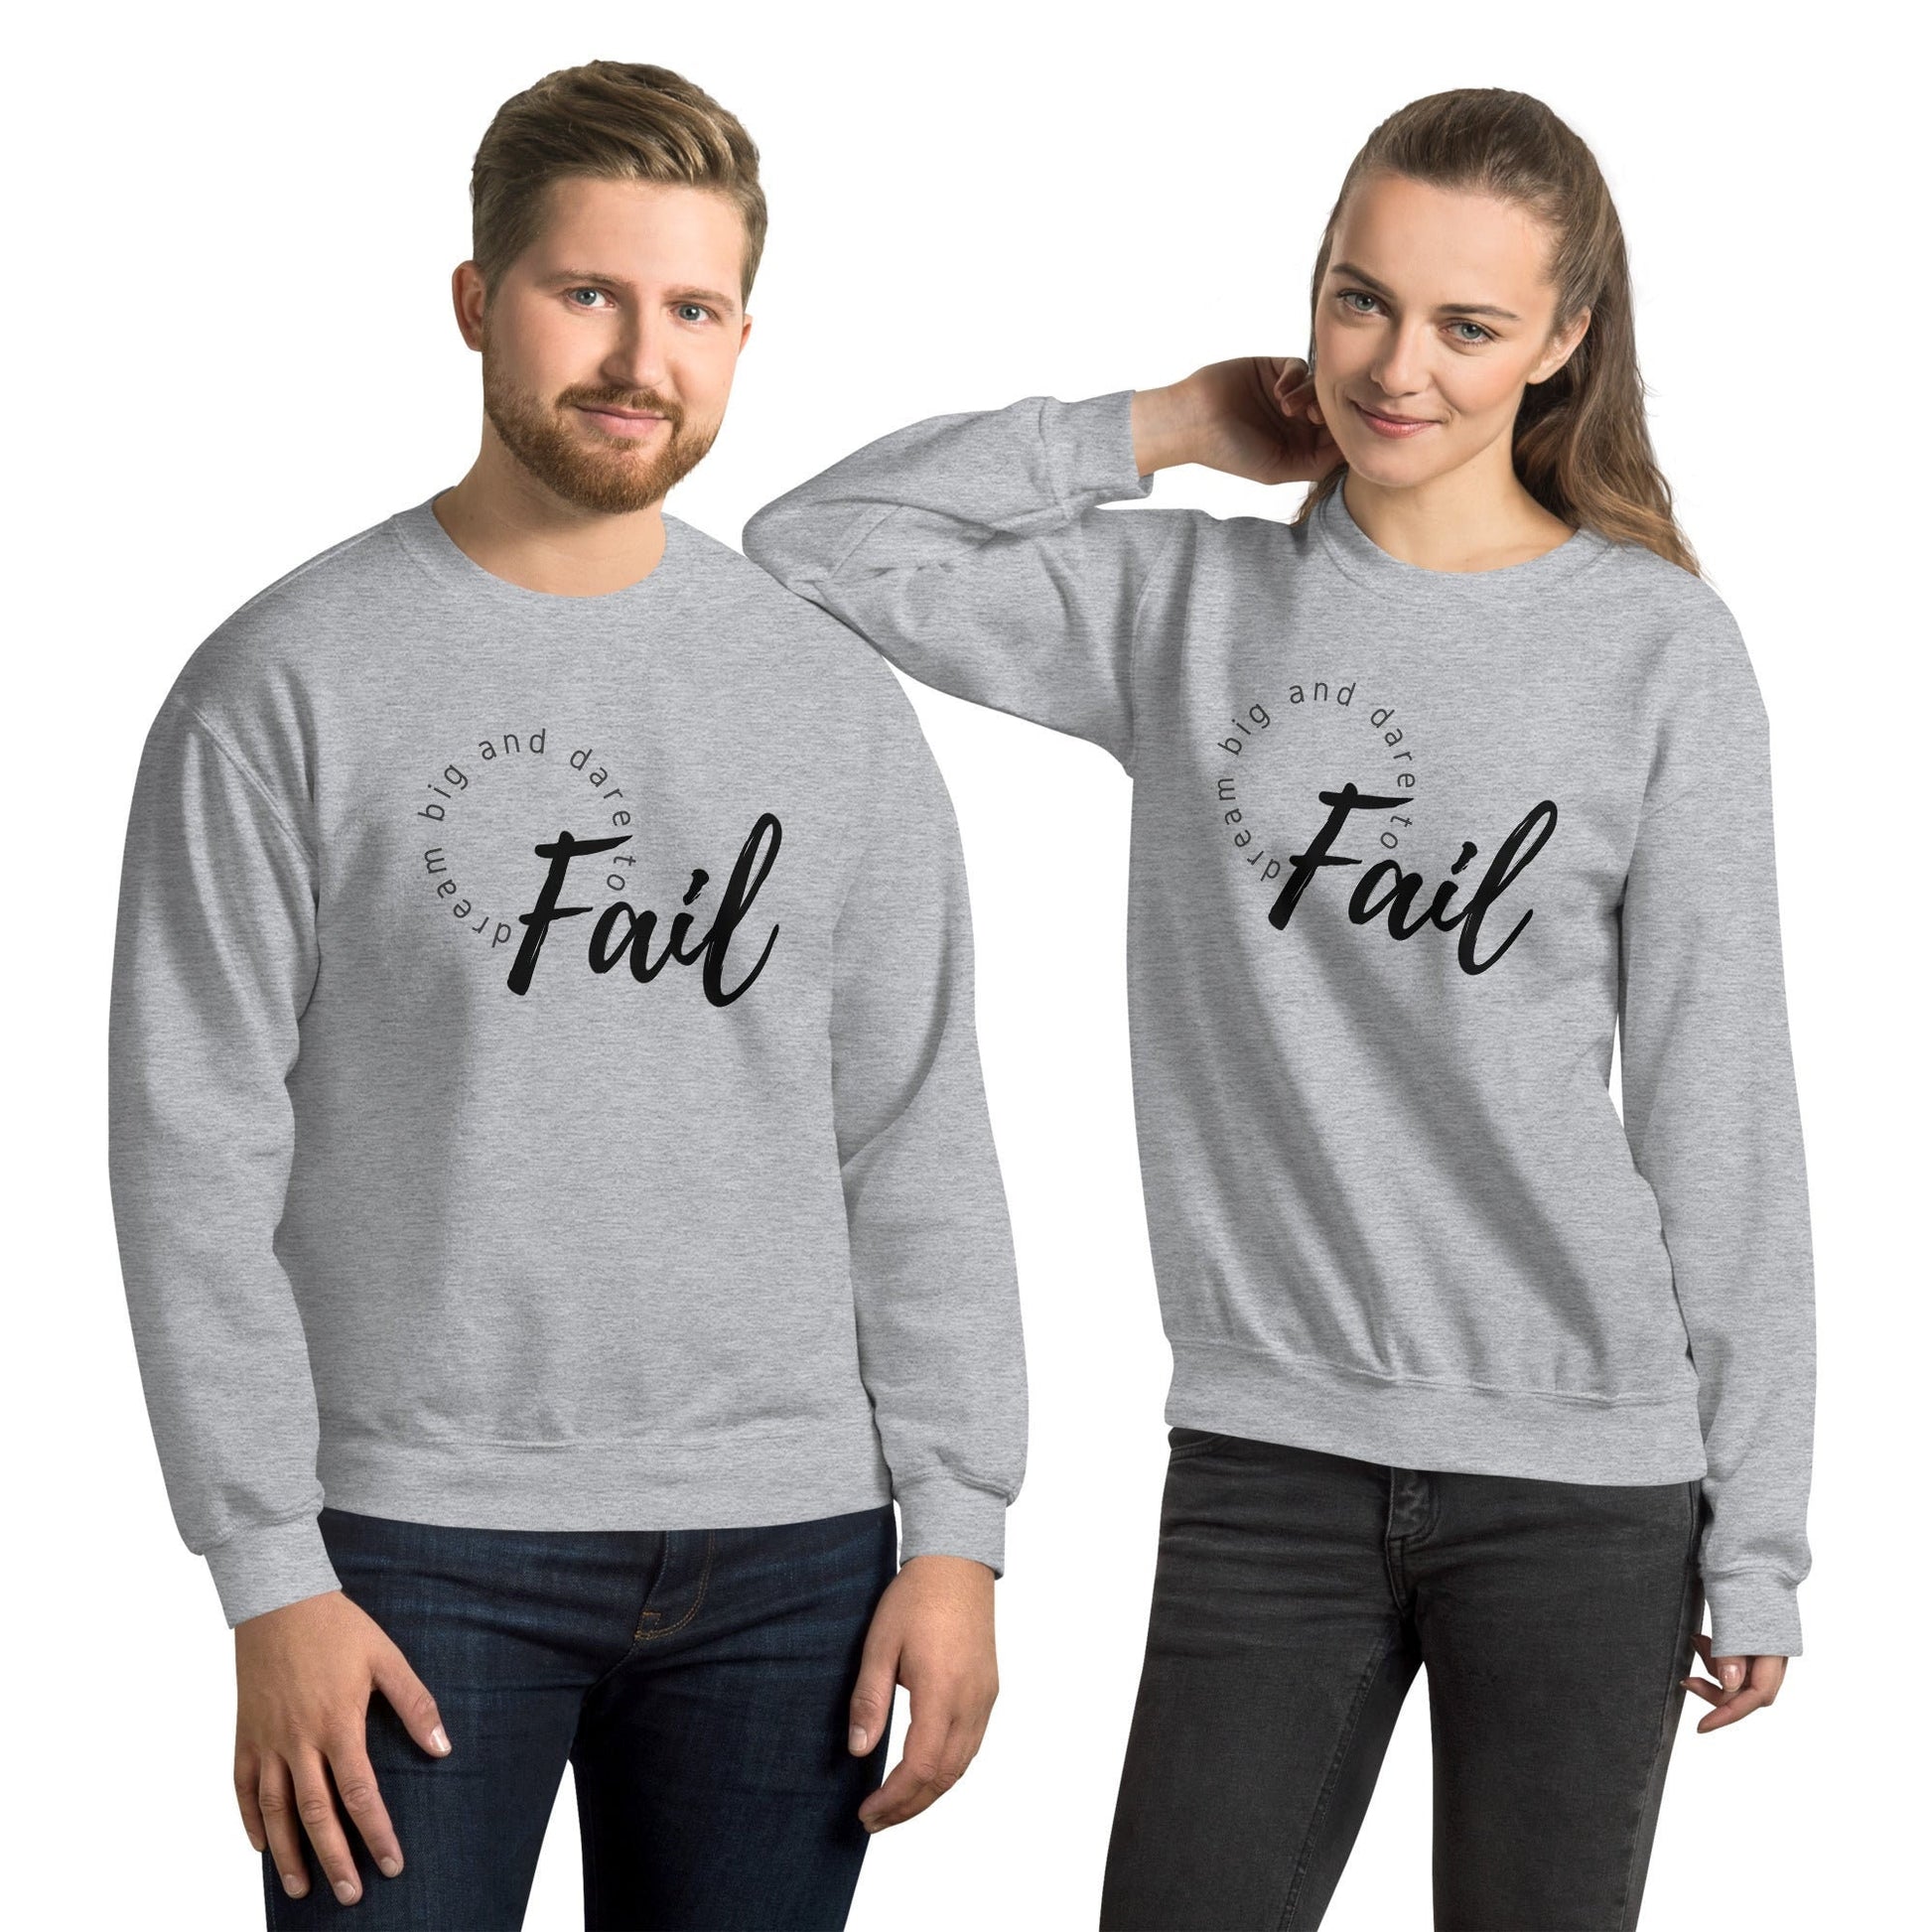 Religious Sweatshirt Dream Big with Inspirational Bible Verse, Matthew 19:26 Sweatshirt For Him Her, Religious Apparel for Fall Winter